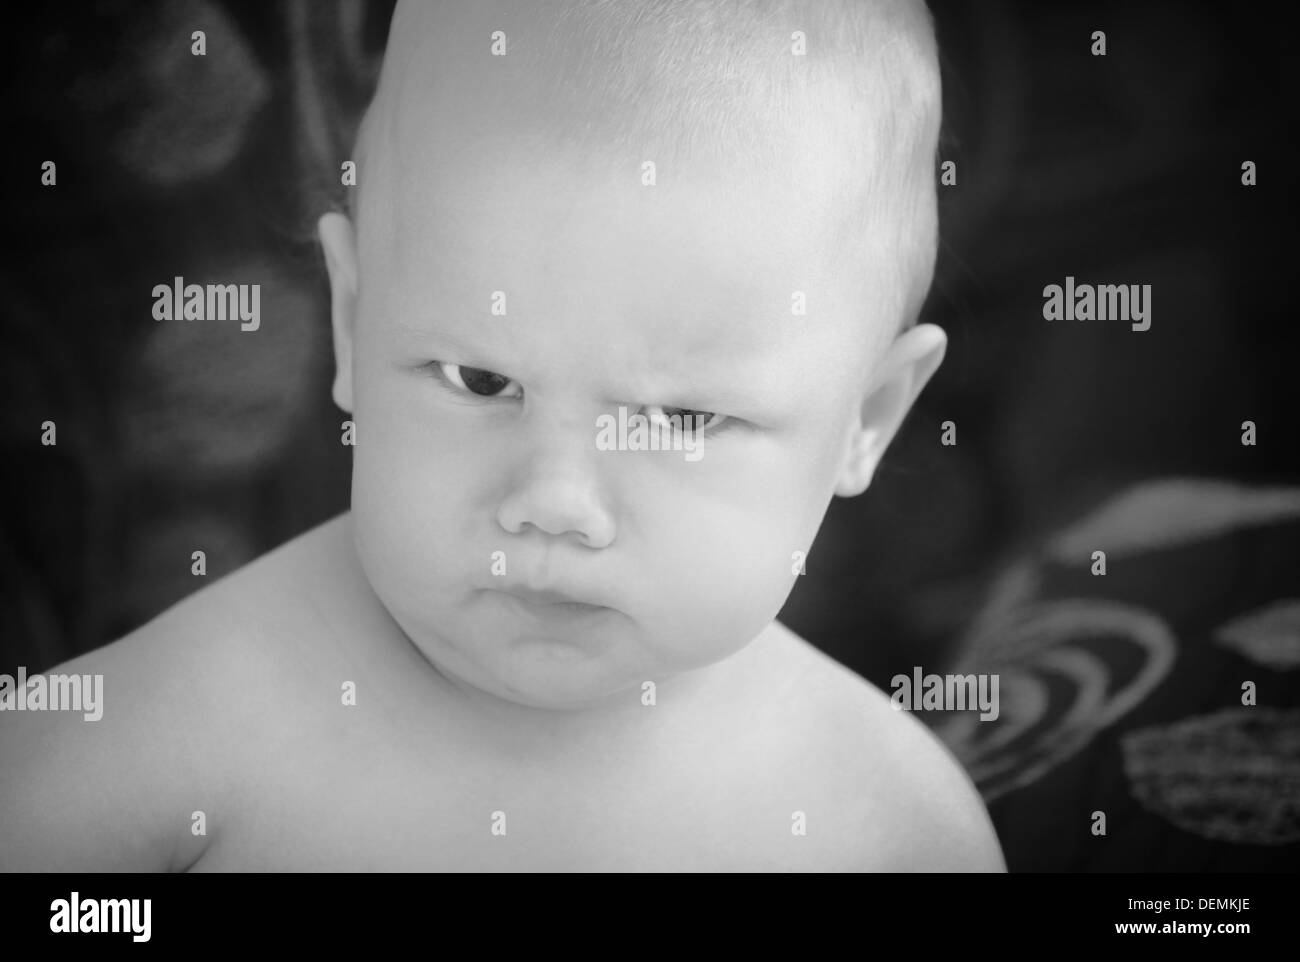 Funny angry baby girl close-up monochrome portrait on dark blurred background Stock Photo